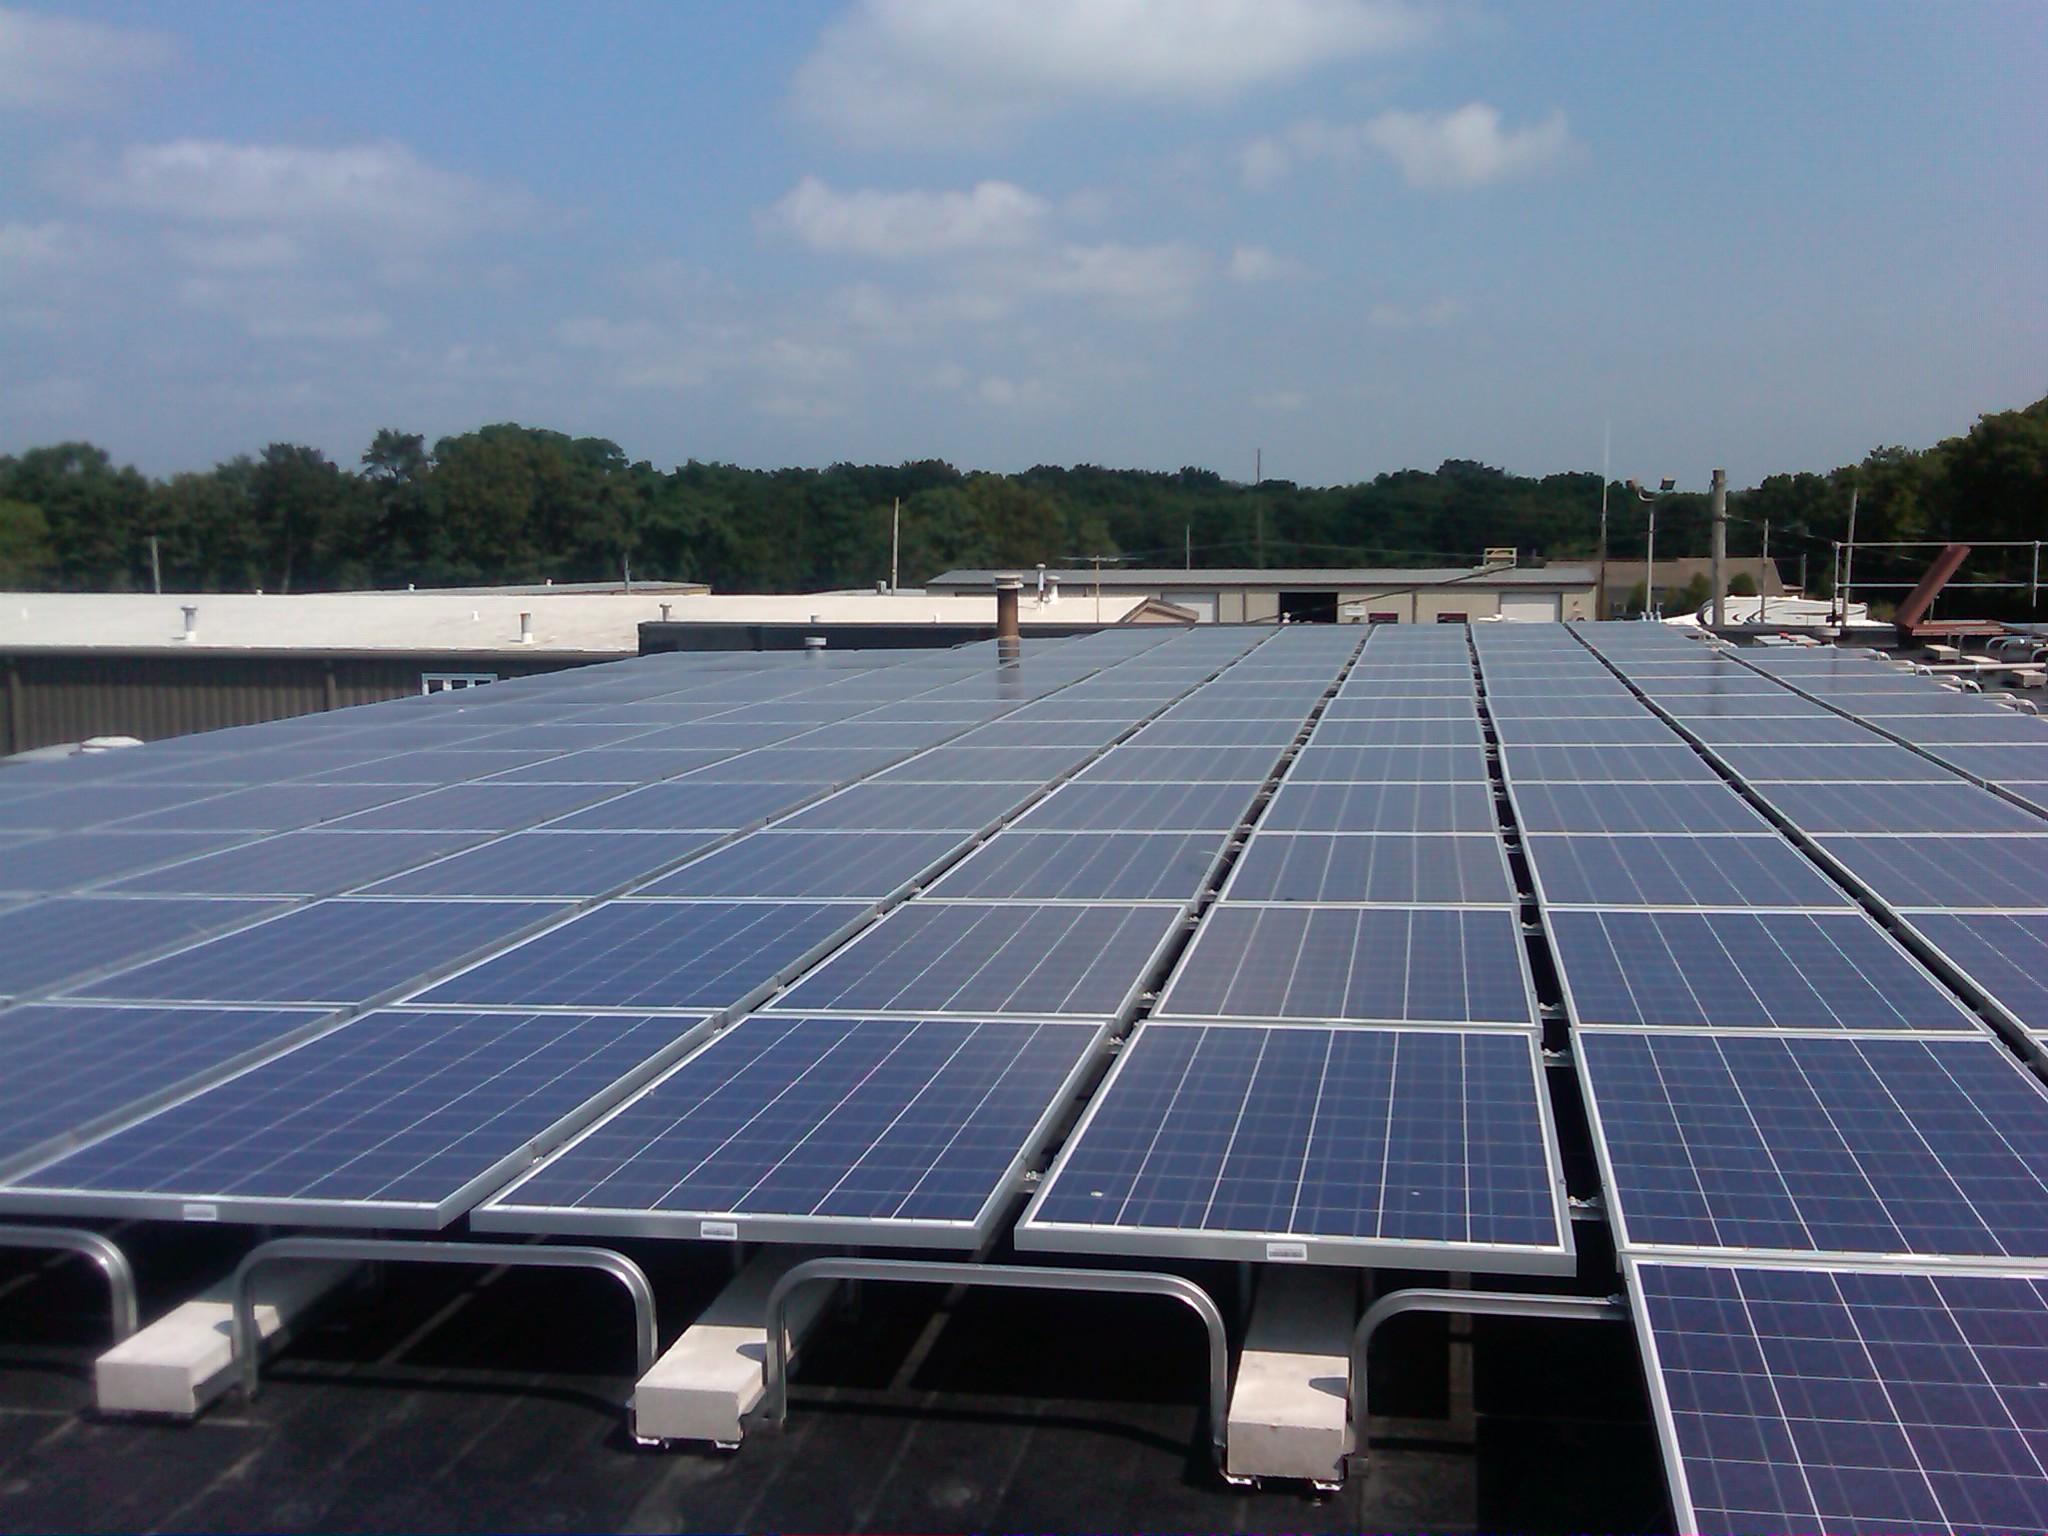 View of system designed, engineered and installed by Beaumont Solar on rubber membrane roof